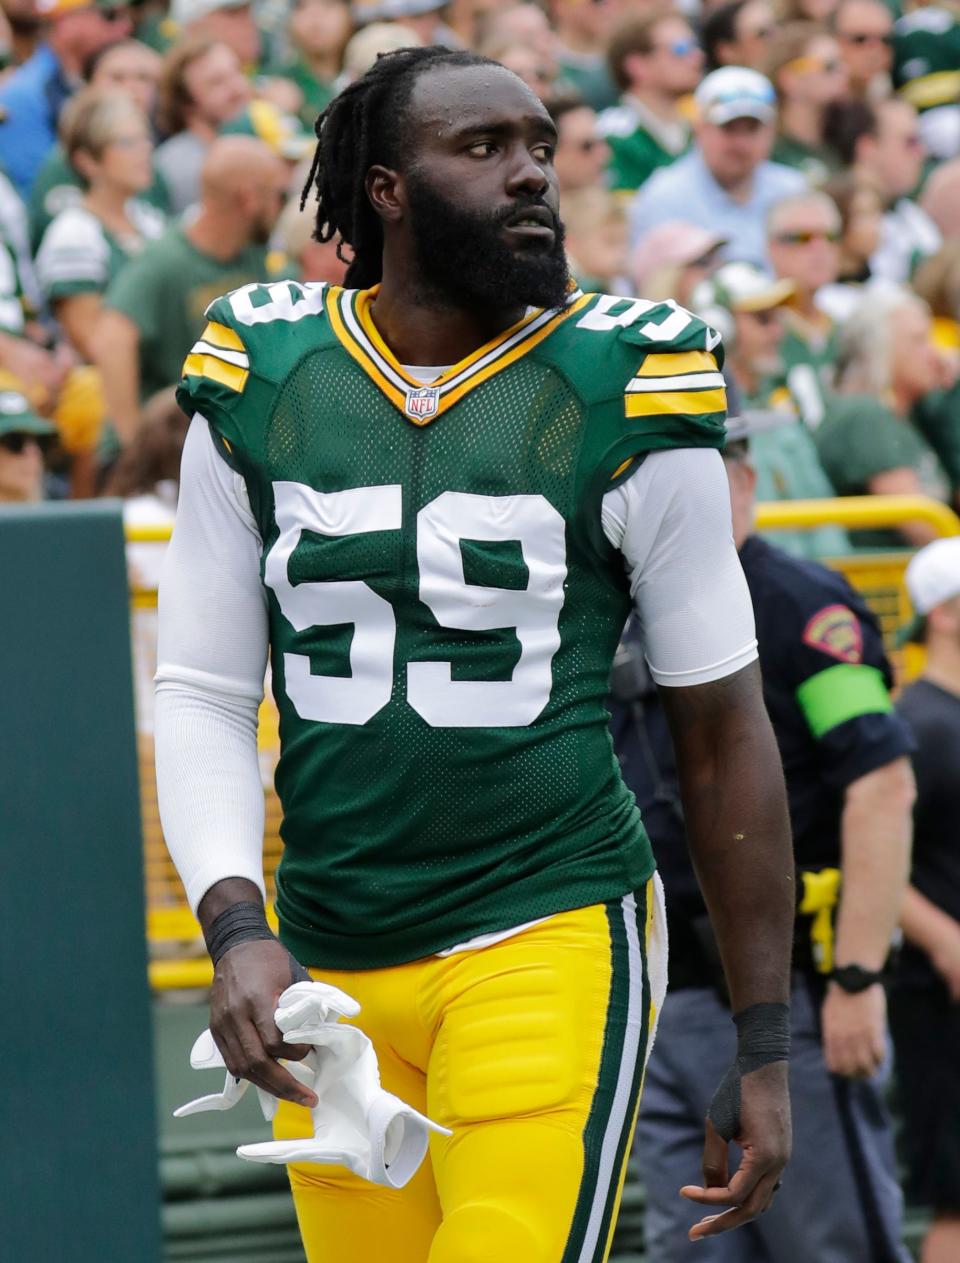 De'Vondre Campbell has signed with the San Francisco 49ers after three seasons in Green Bay in which he says he was "badly misused."